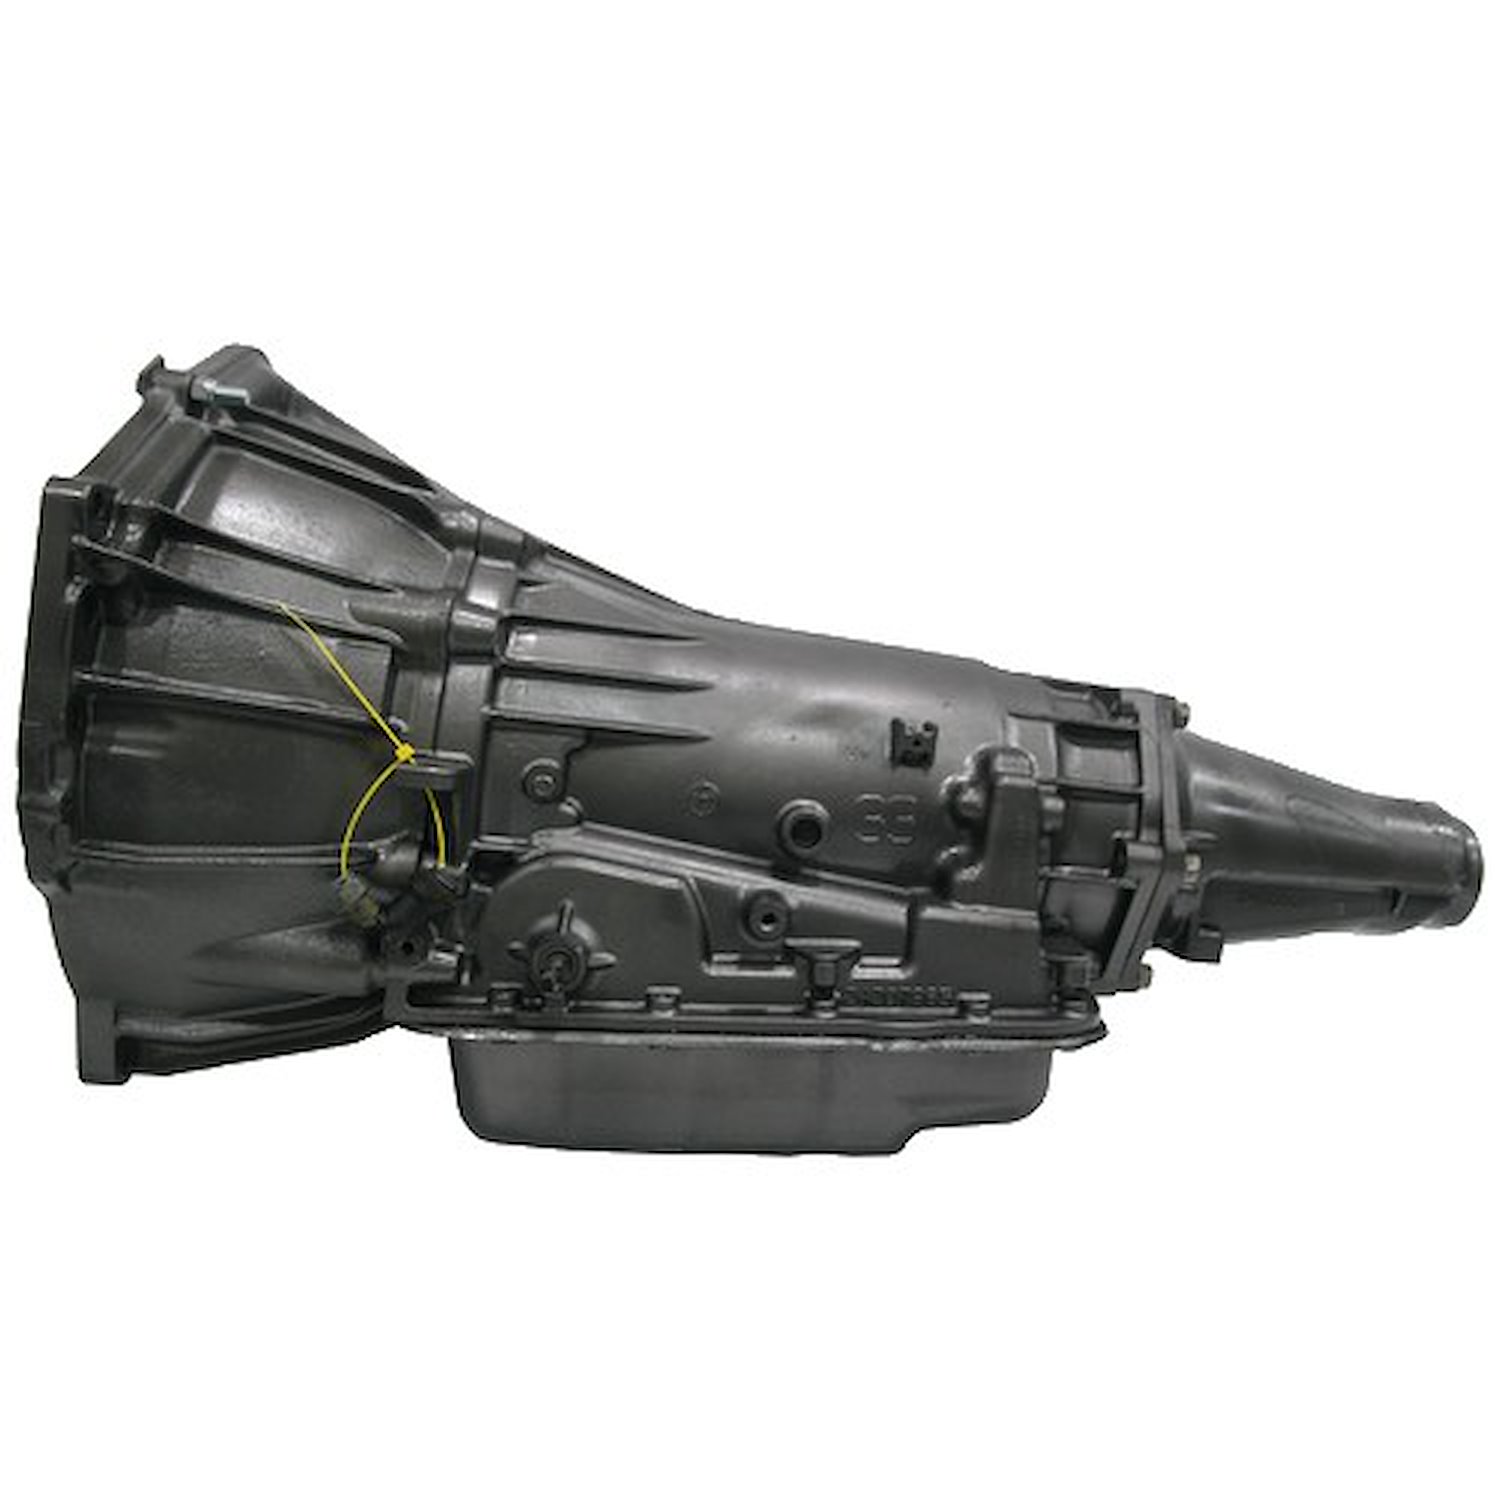 4L60E Reman Auto Trans Fits 1998-1999 Chevrolet & GMC C-Series Truck w/Extended Cab w/305 & 350 V8 Eng.